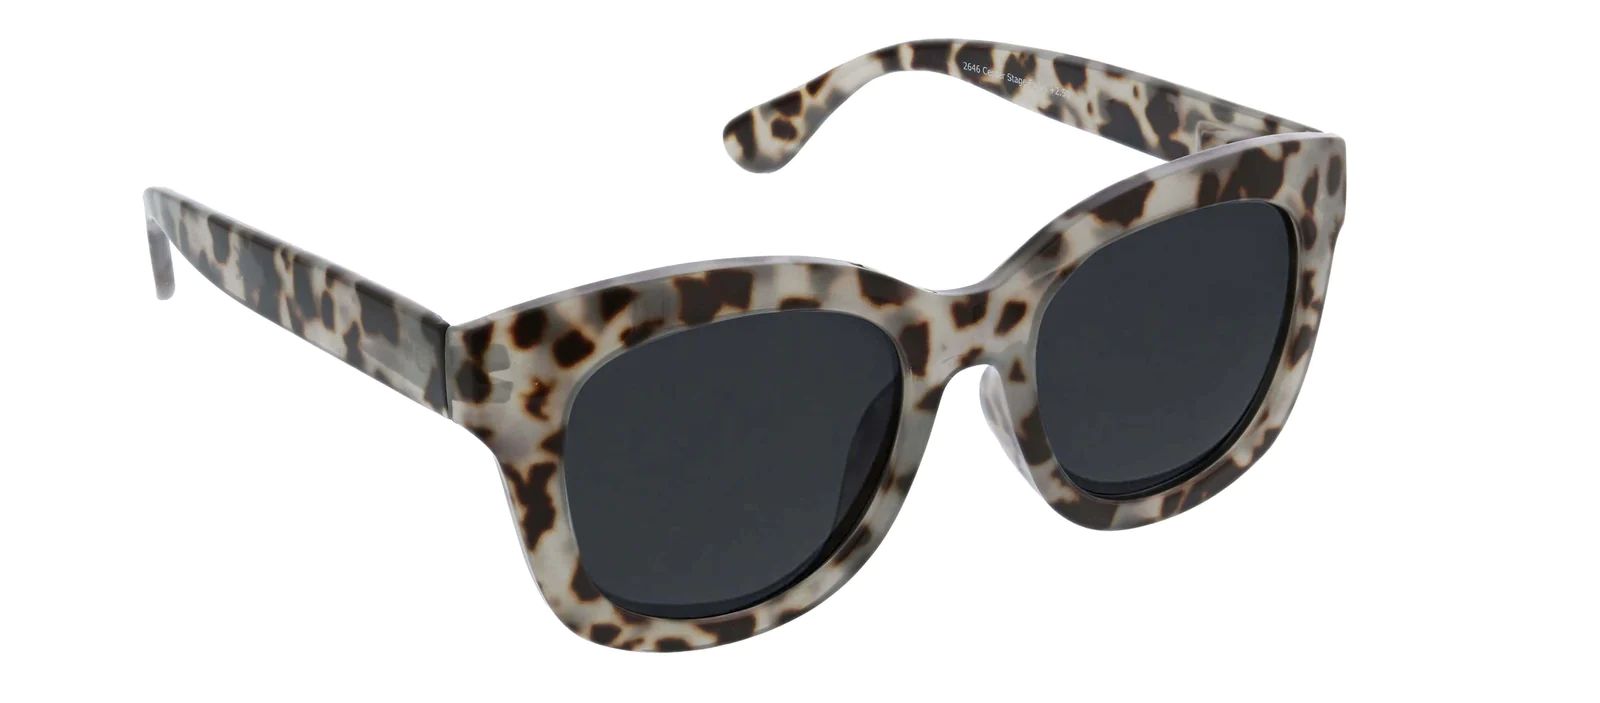 Center Stage (Polarized Sunglasses) | PEEPERS